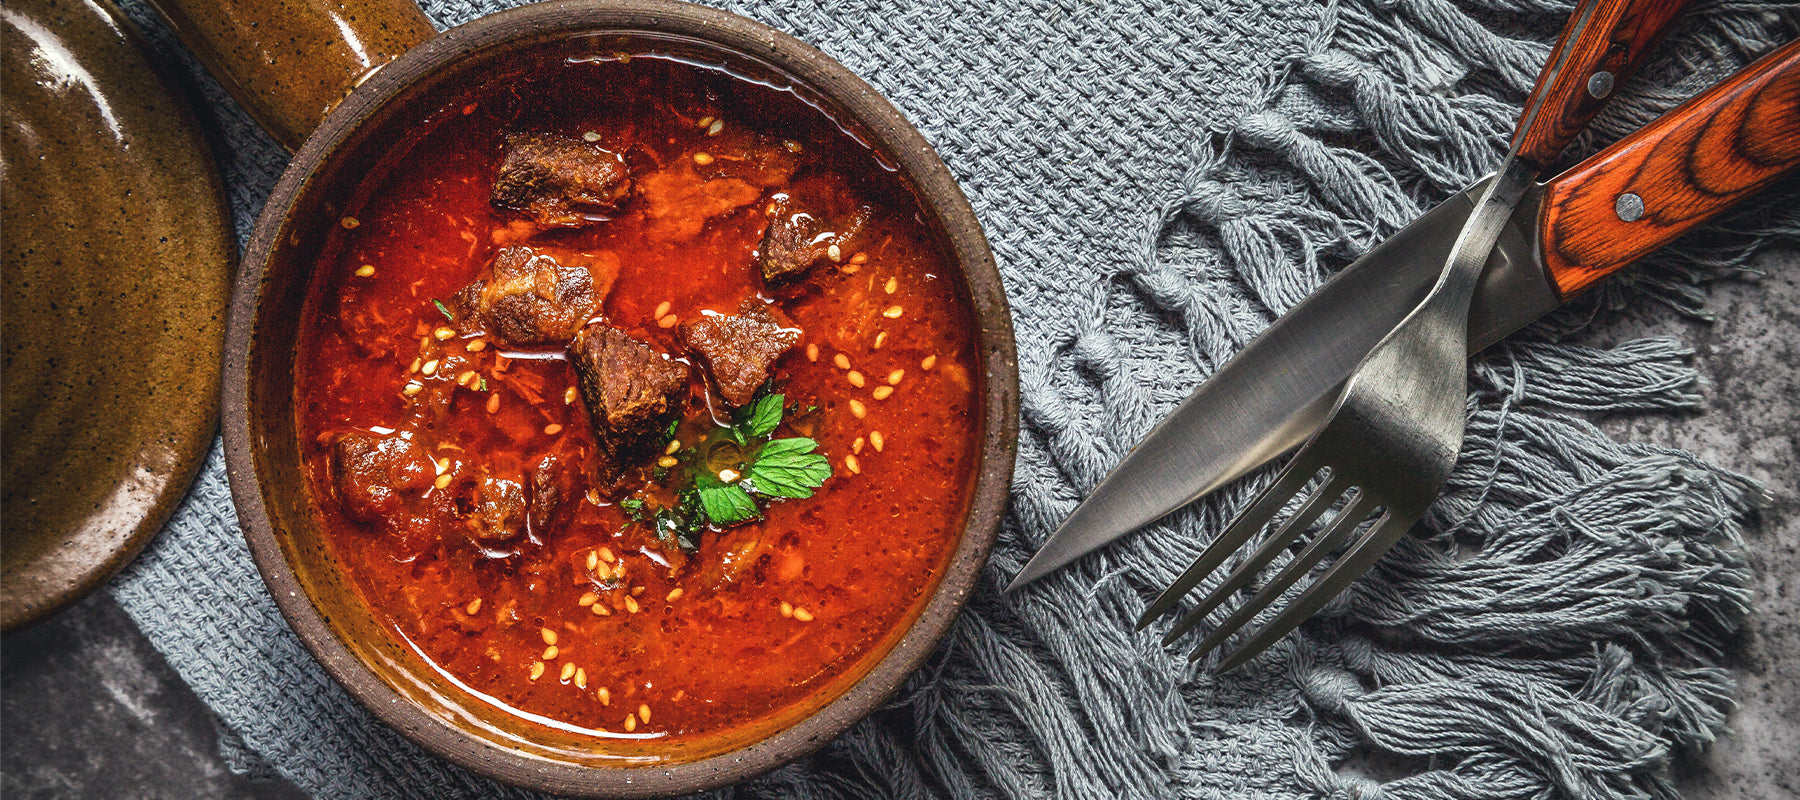 Flavourful and Fragrant: How to Make Delicious Lamb Rogan Josh Curry at Home